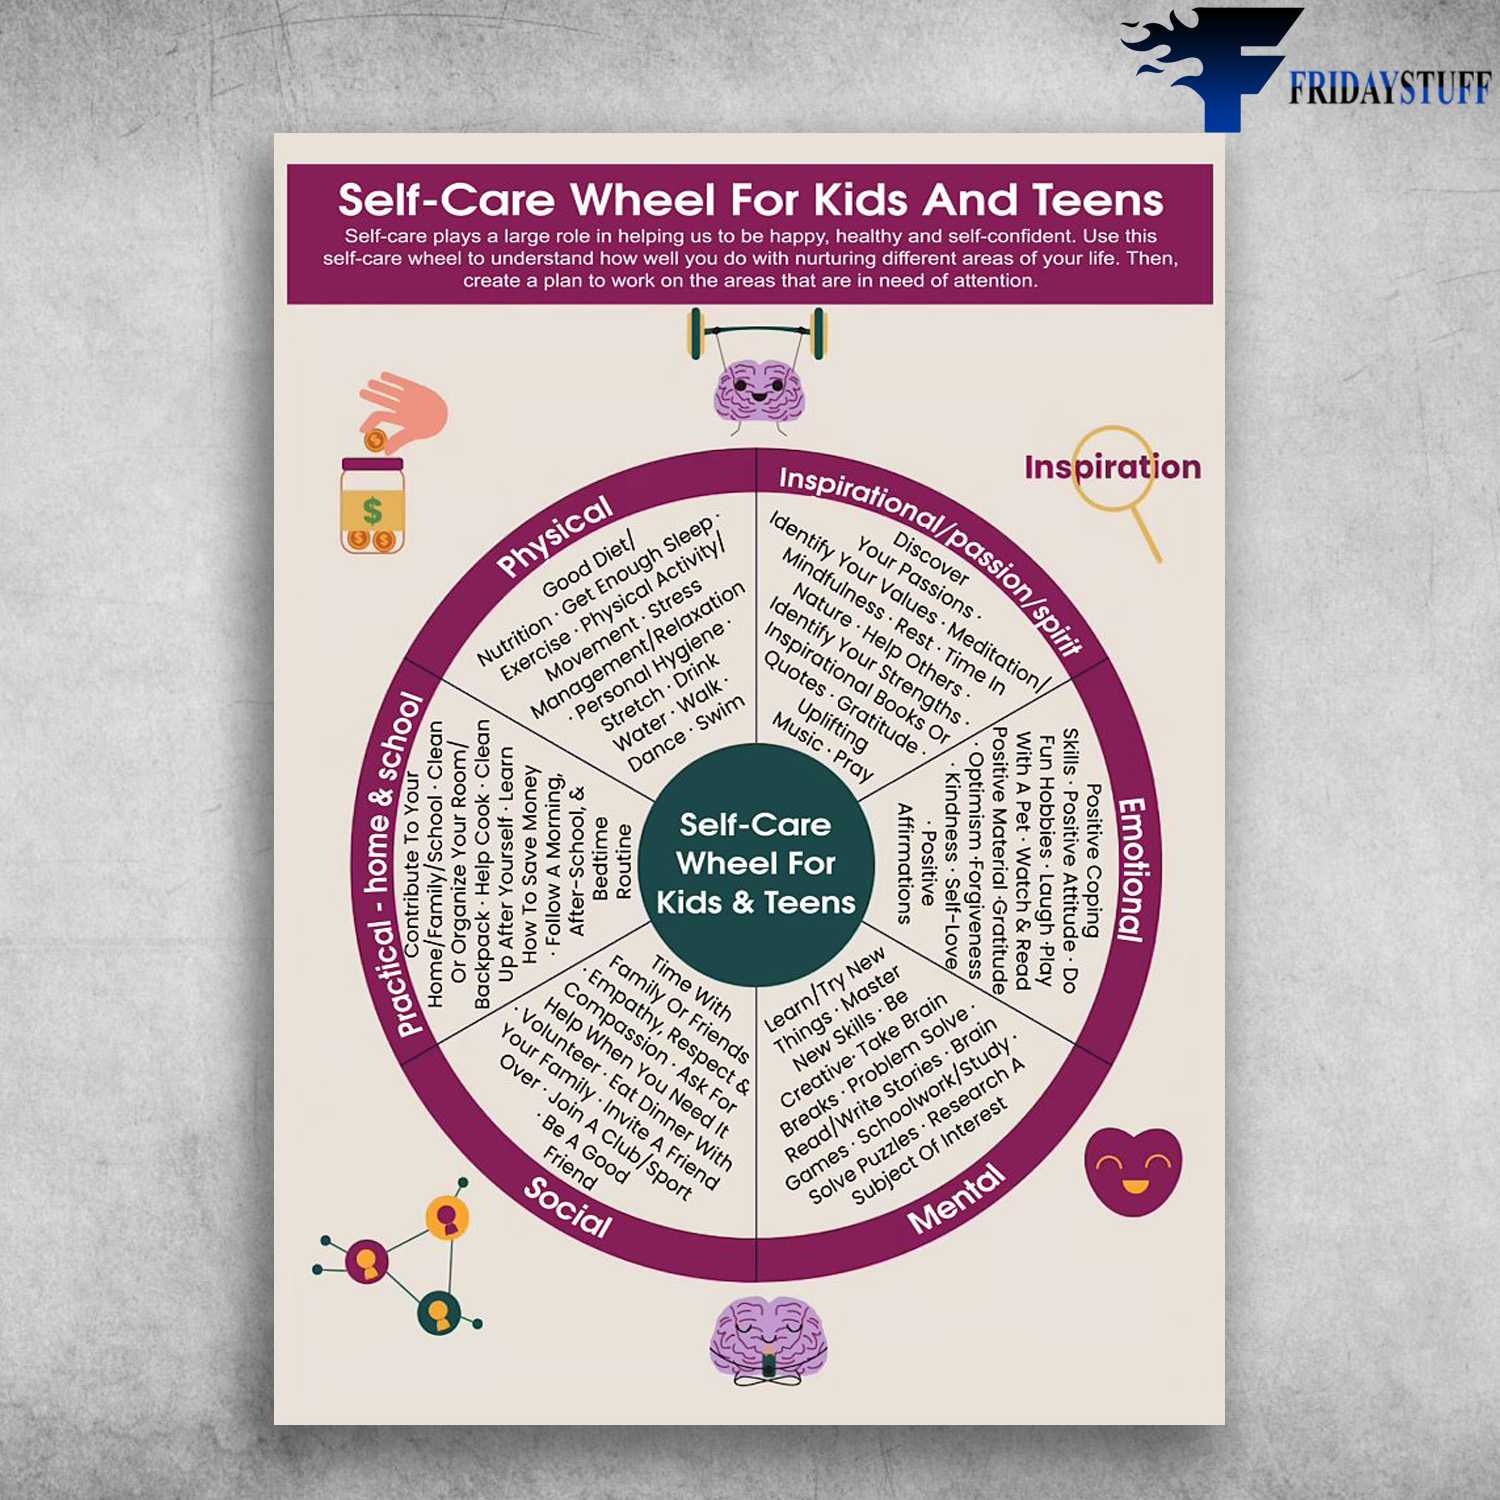 Healthy Life - Self-Care Wheel For Kids And Teens, Physical Good Diet, Nutrion, Get Enough Sleep